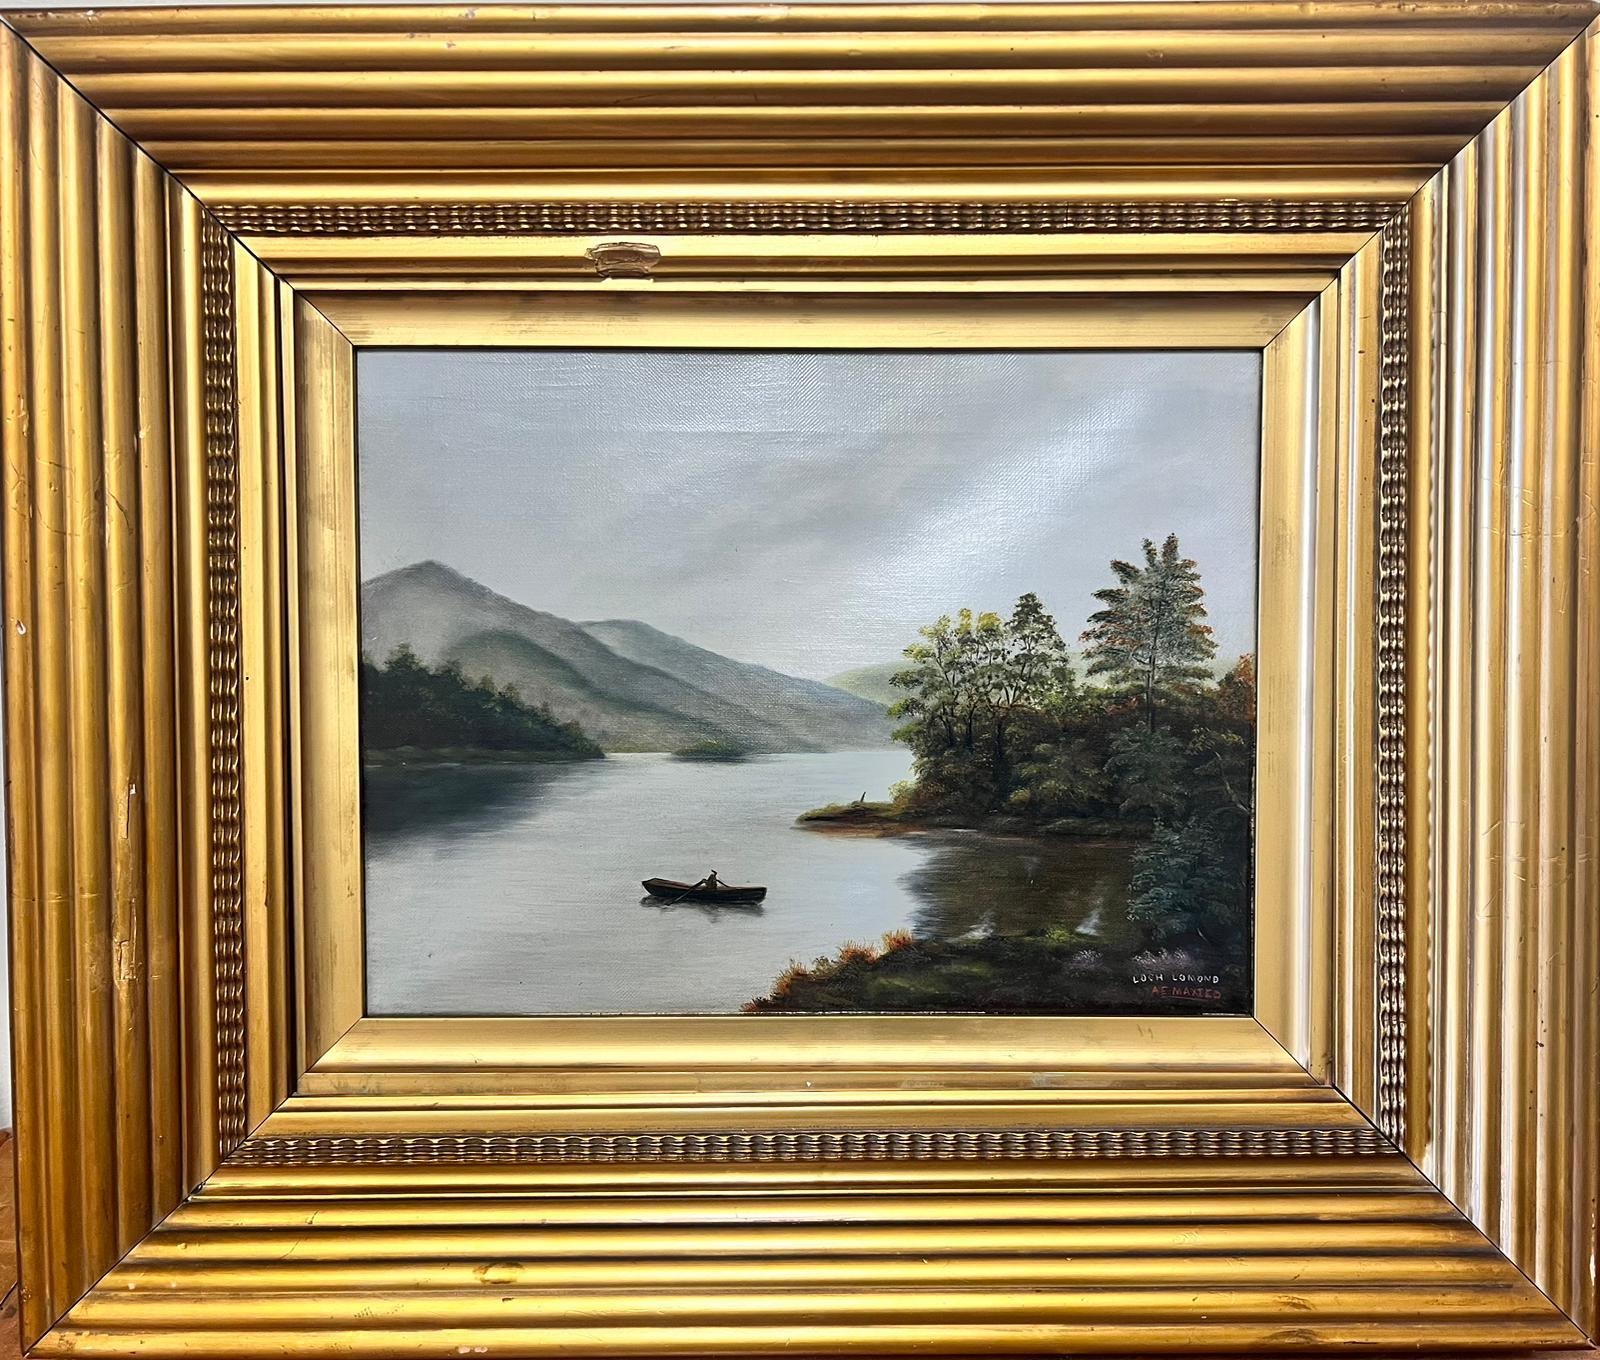 Loch Lomond
oil on canvas, framed
framed: 16 x 19 inches
canvas: 11 x 14 inches
provenance: private collection, England
condition: very good and sound condition - damage/ chip in frame
